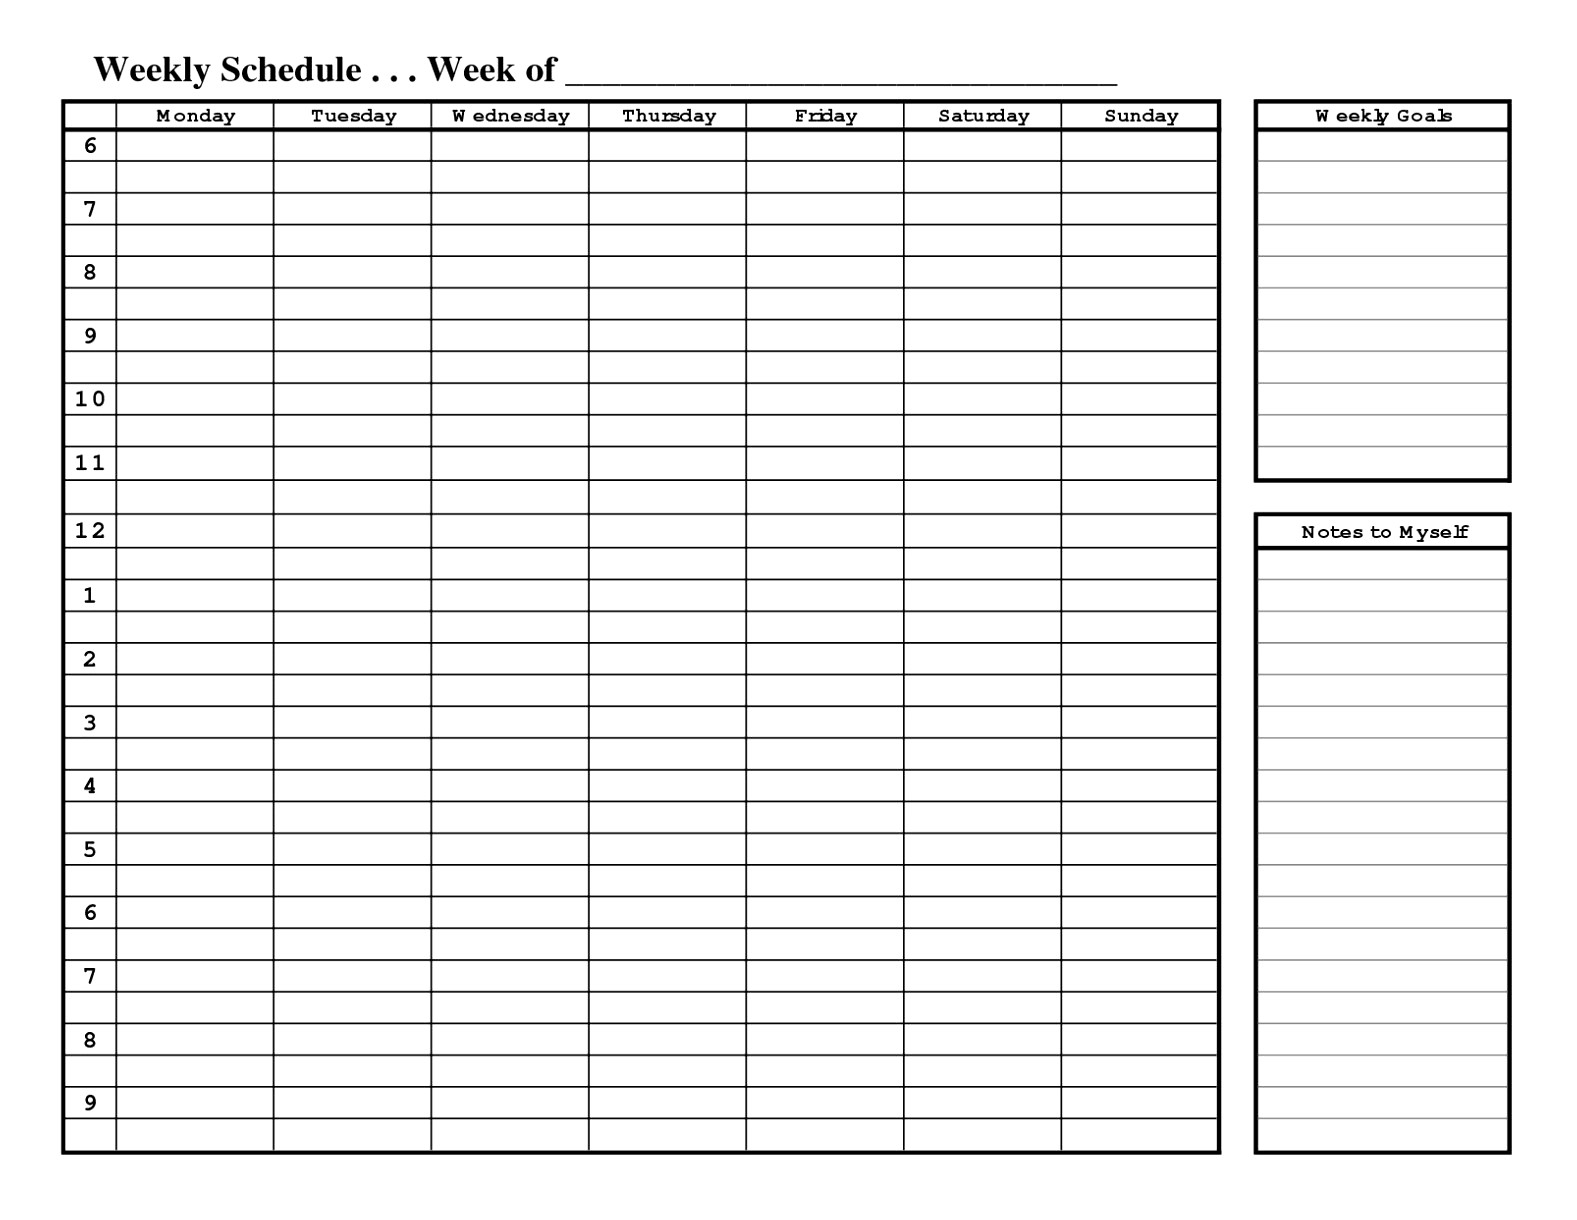 daily schedule template free